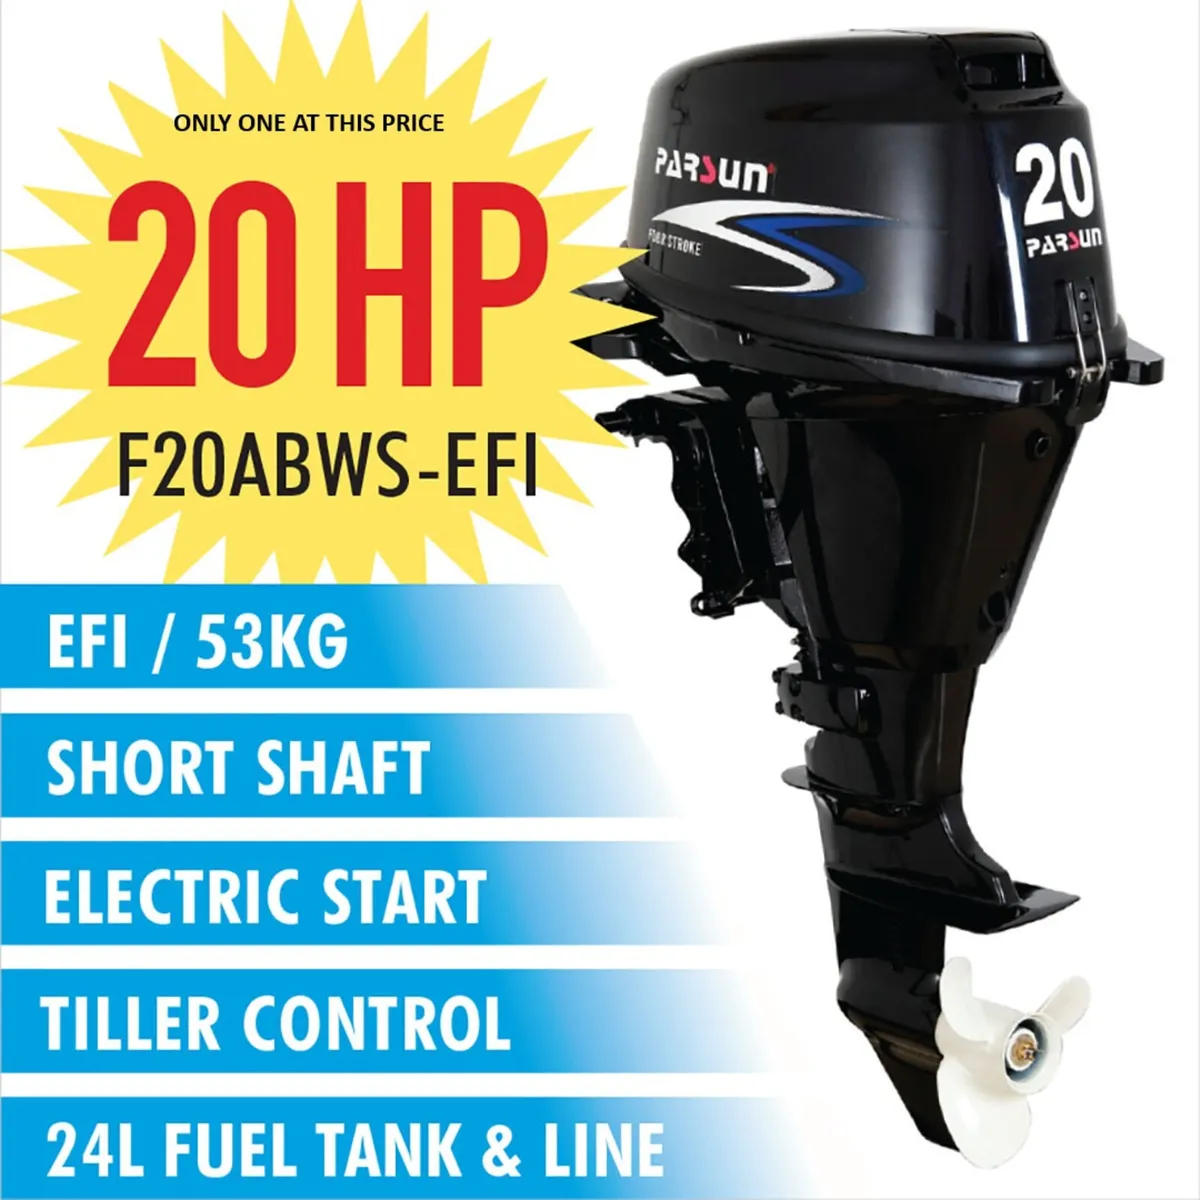 Parsun 20HP  new only one at this price